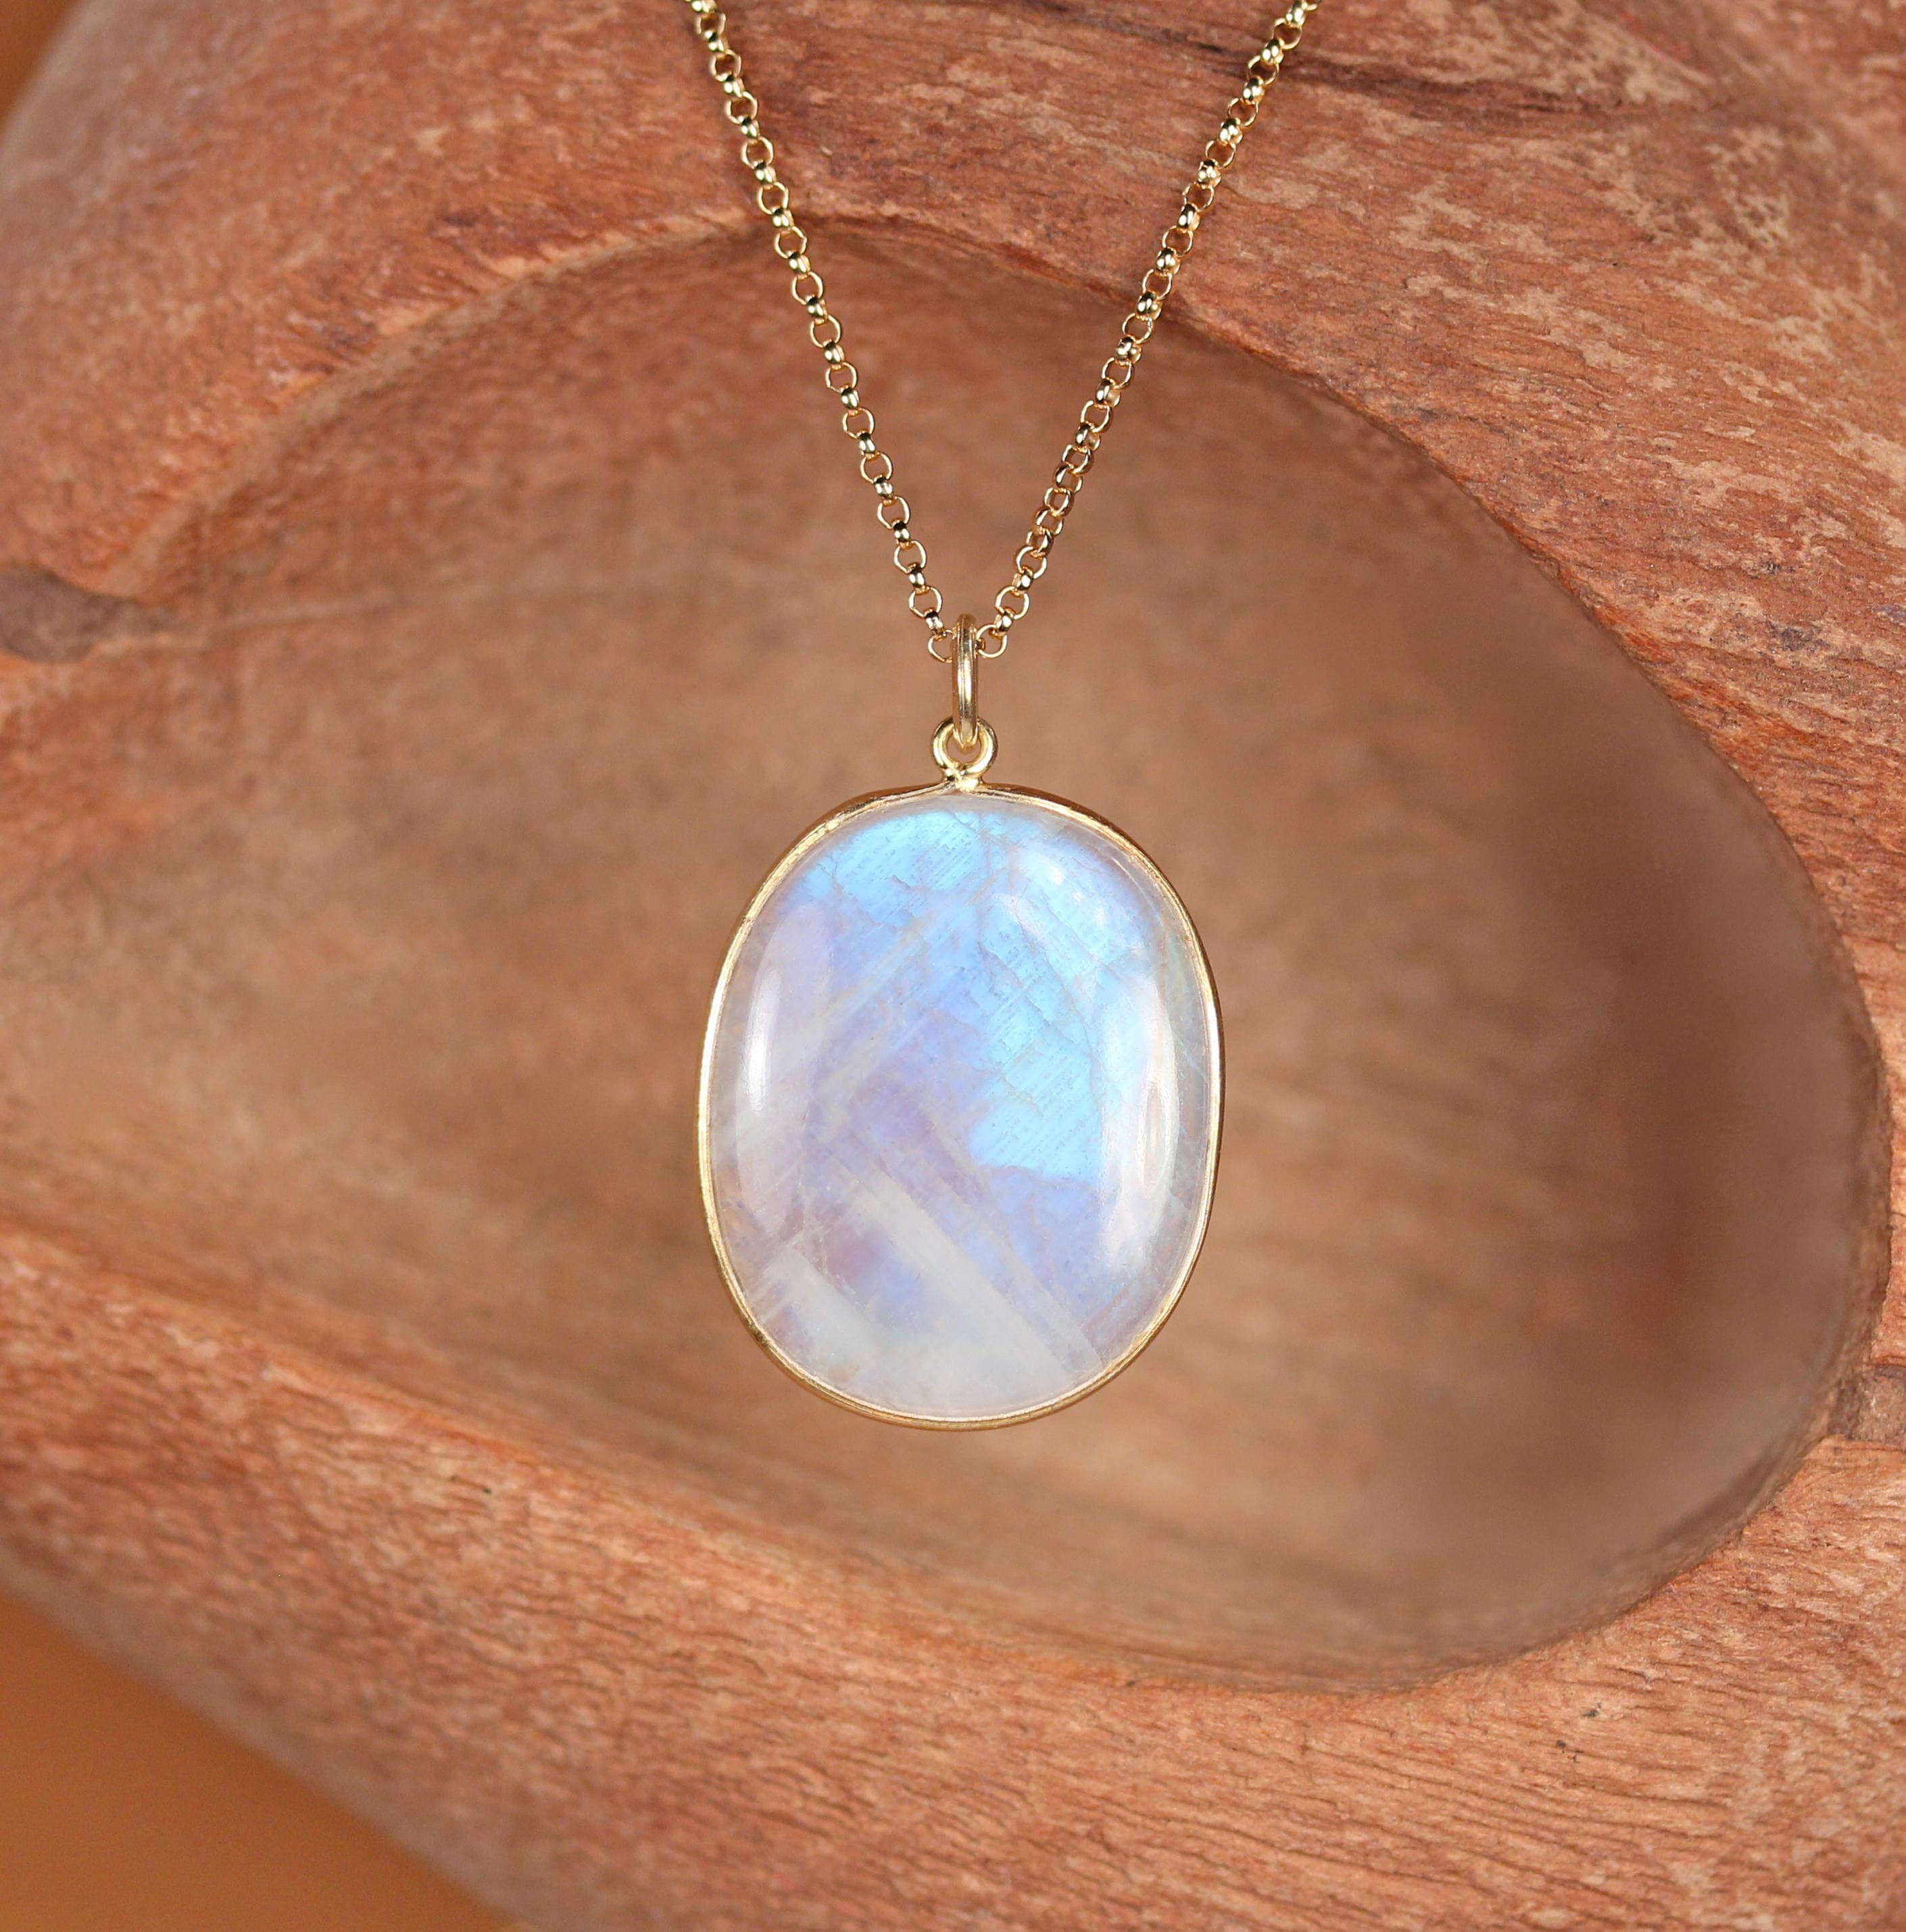 Large rainbow moonstone necklace crystal necklace june